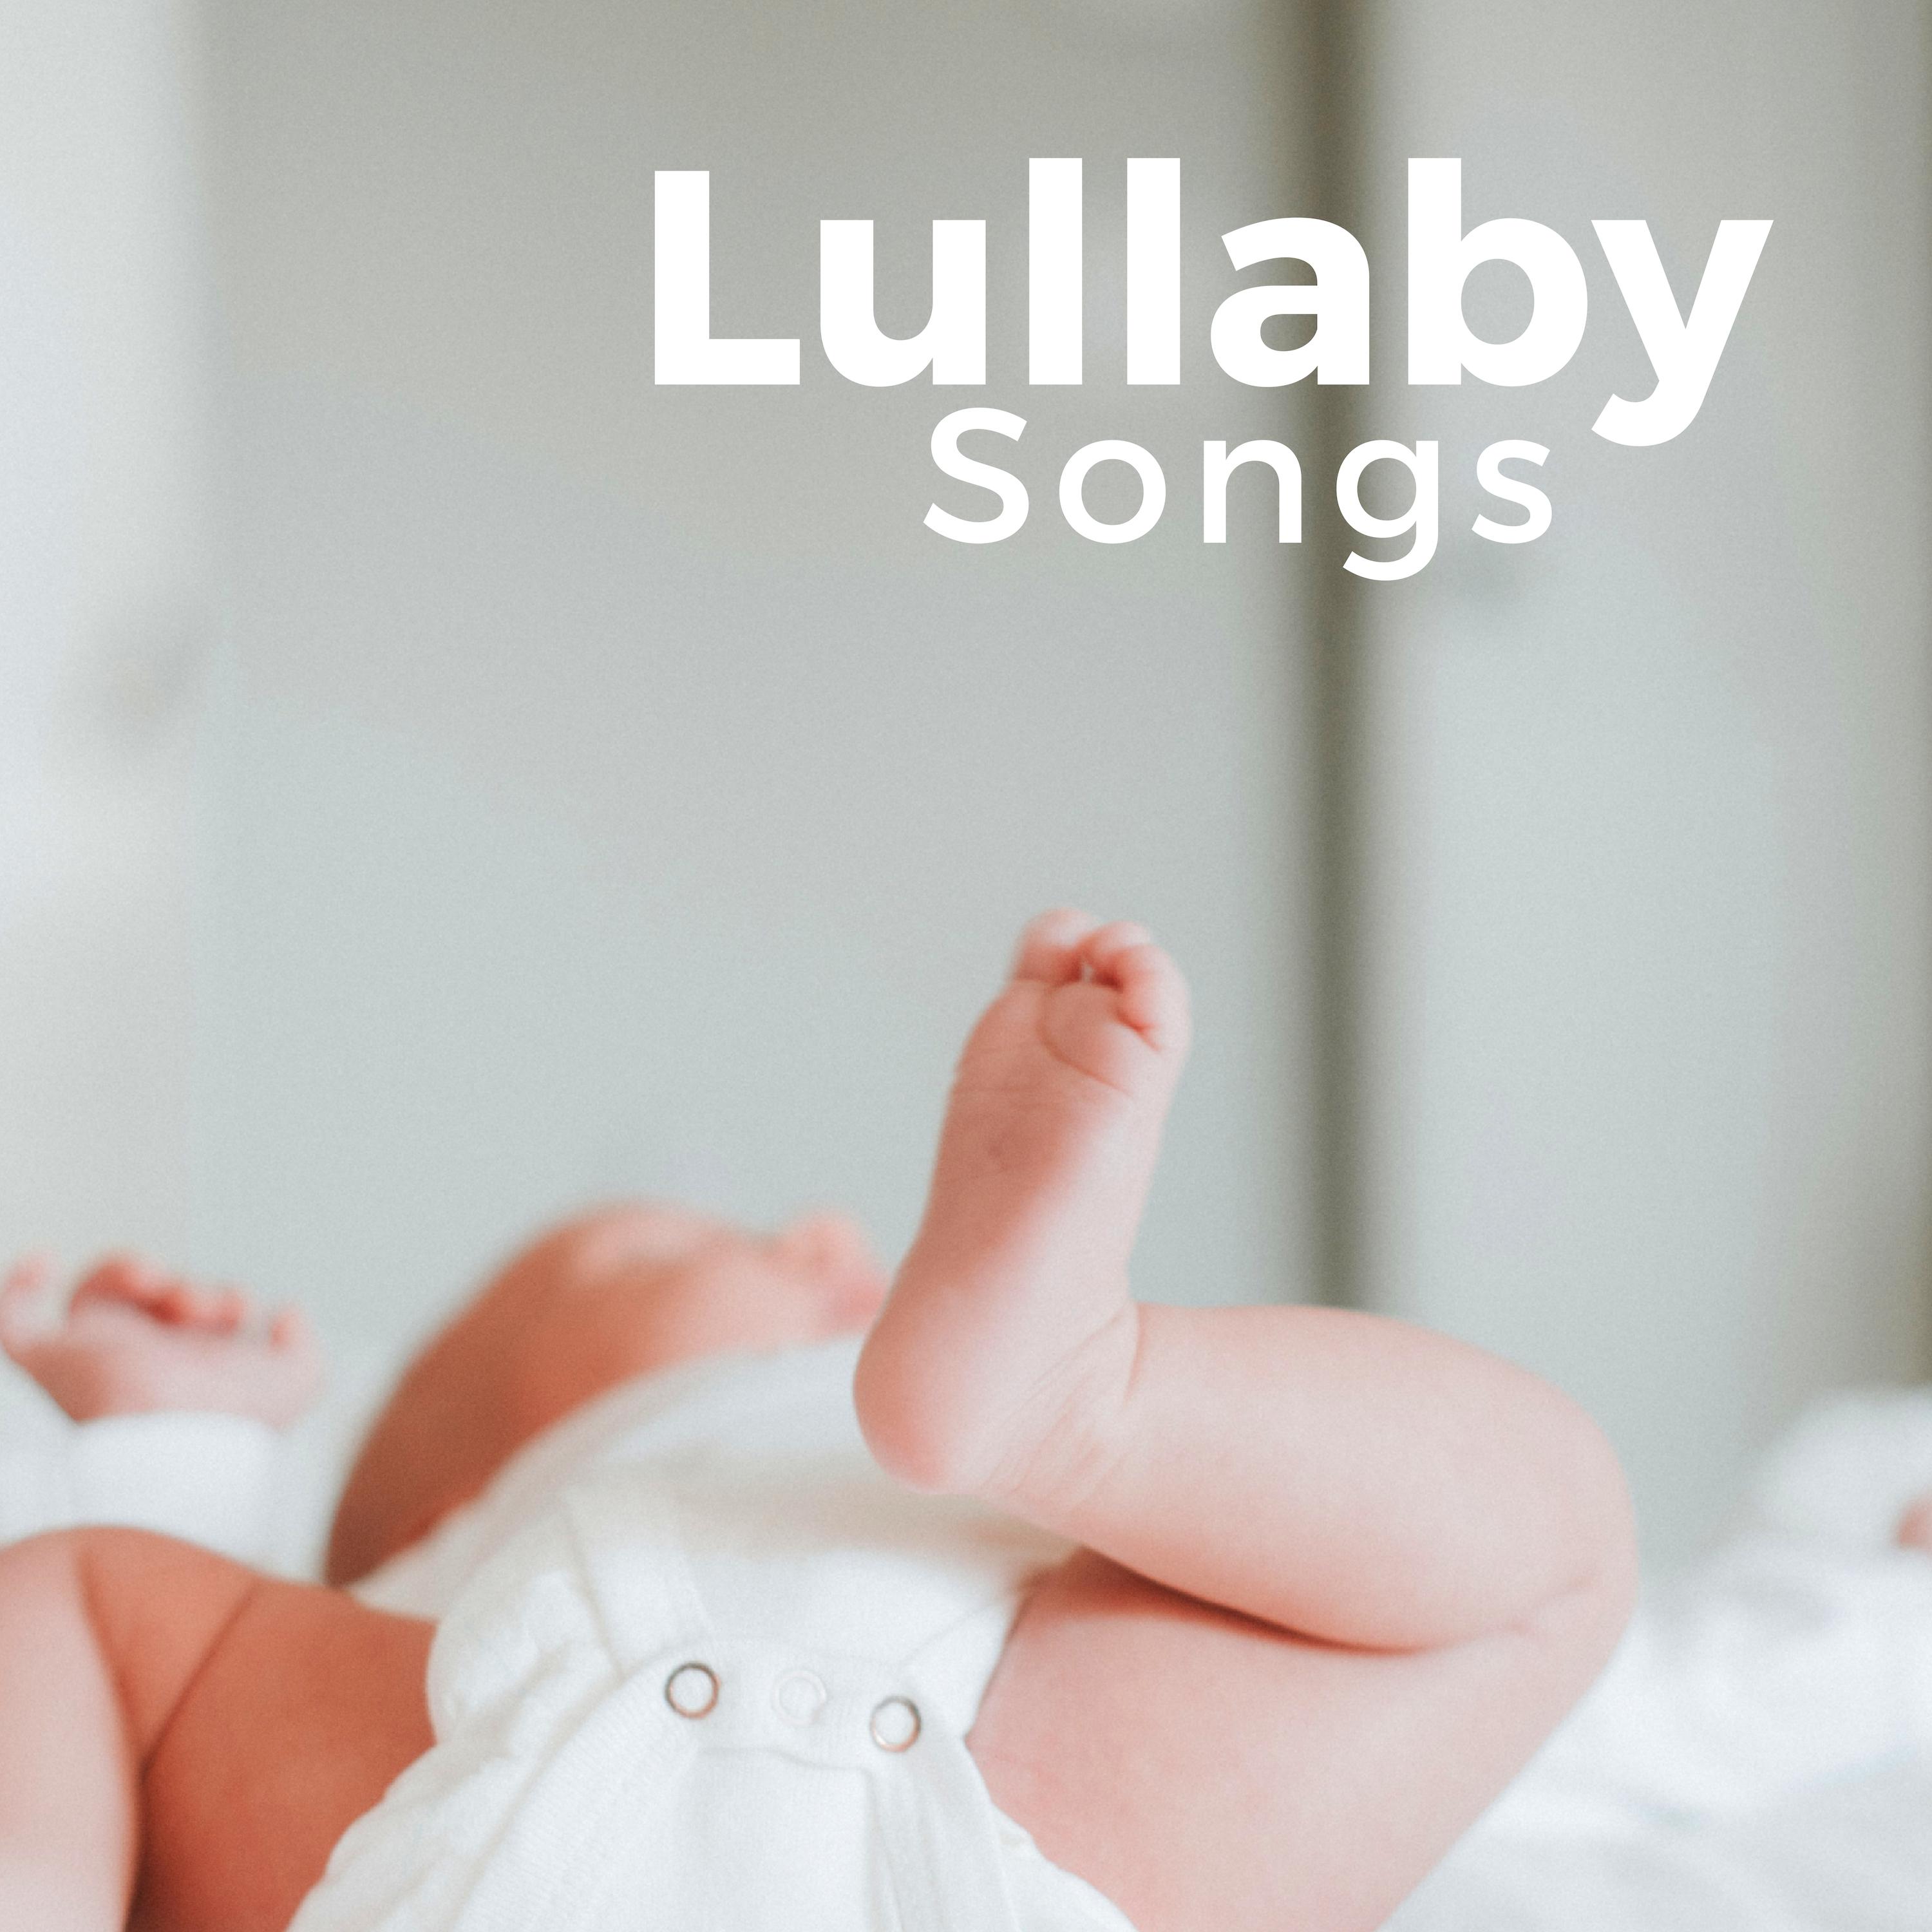 Lullaby Songs CD - Sound Machine for Kids